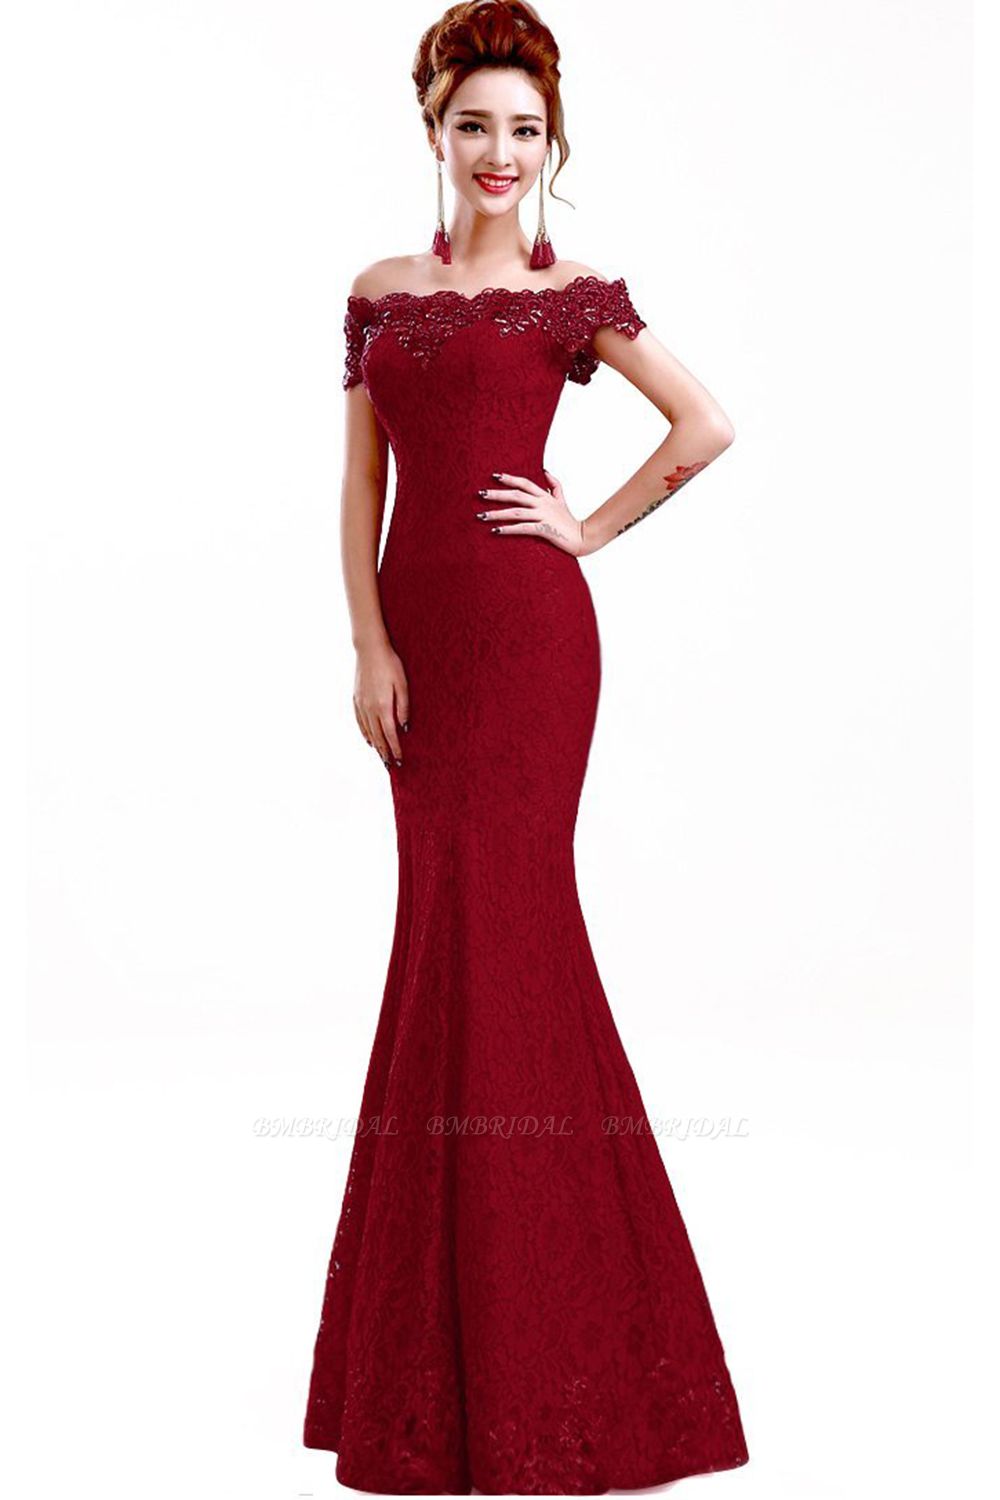 BMbridal Off-the-Shoulder Lace Mermaid Prom Dress Long Evening Party Gowns Online